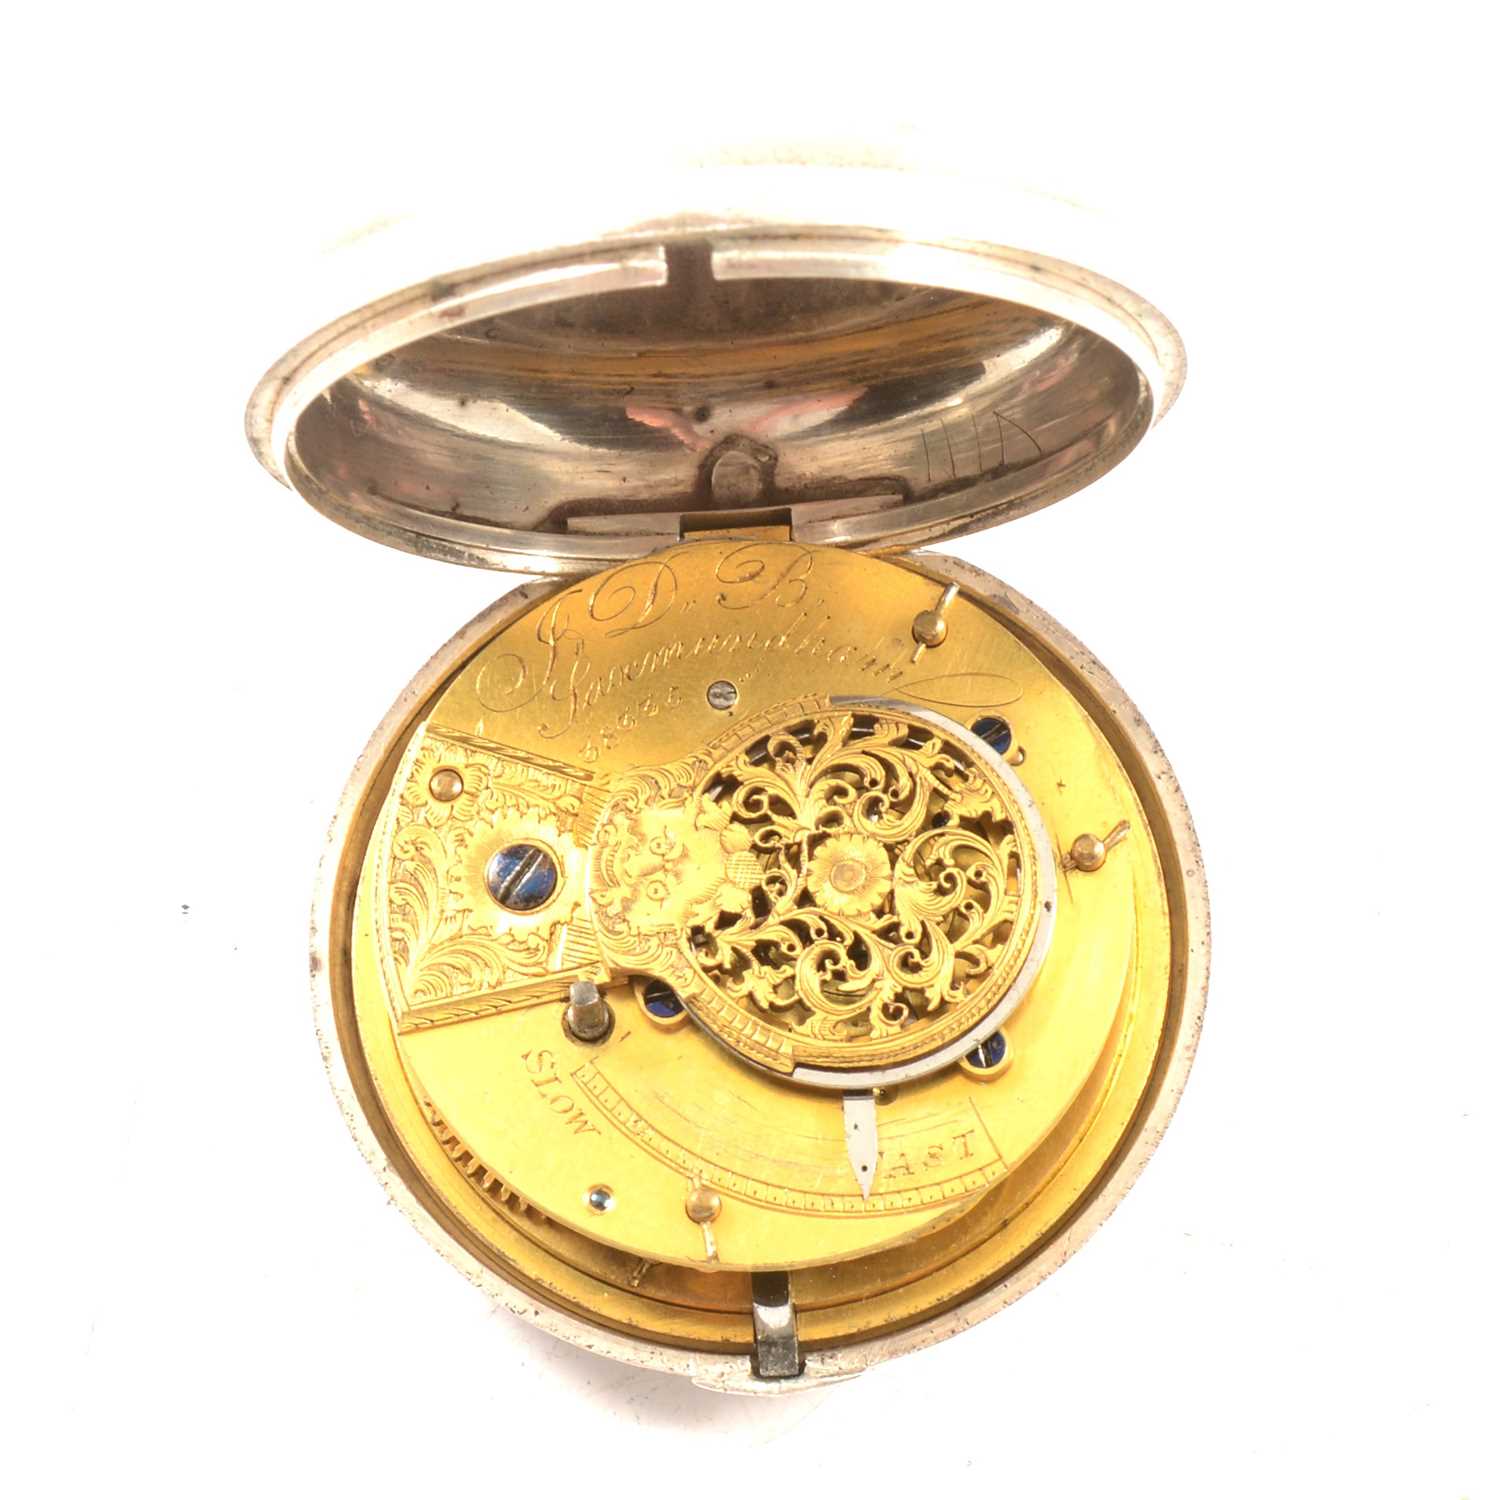 Silver pair cased pocket watch, London 1825, - Image 2 of 2